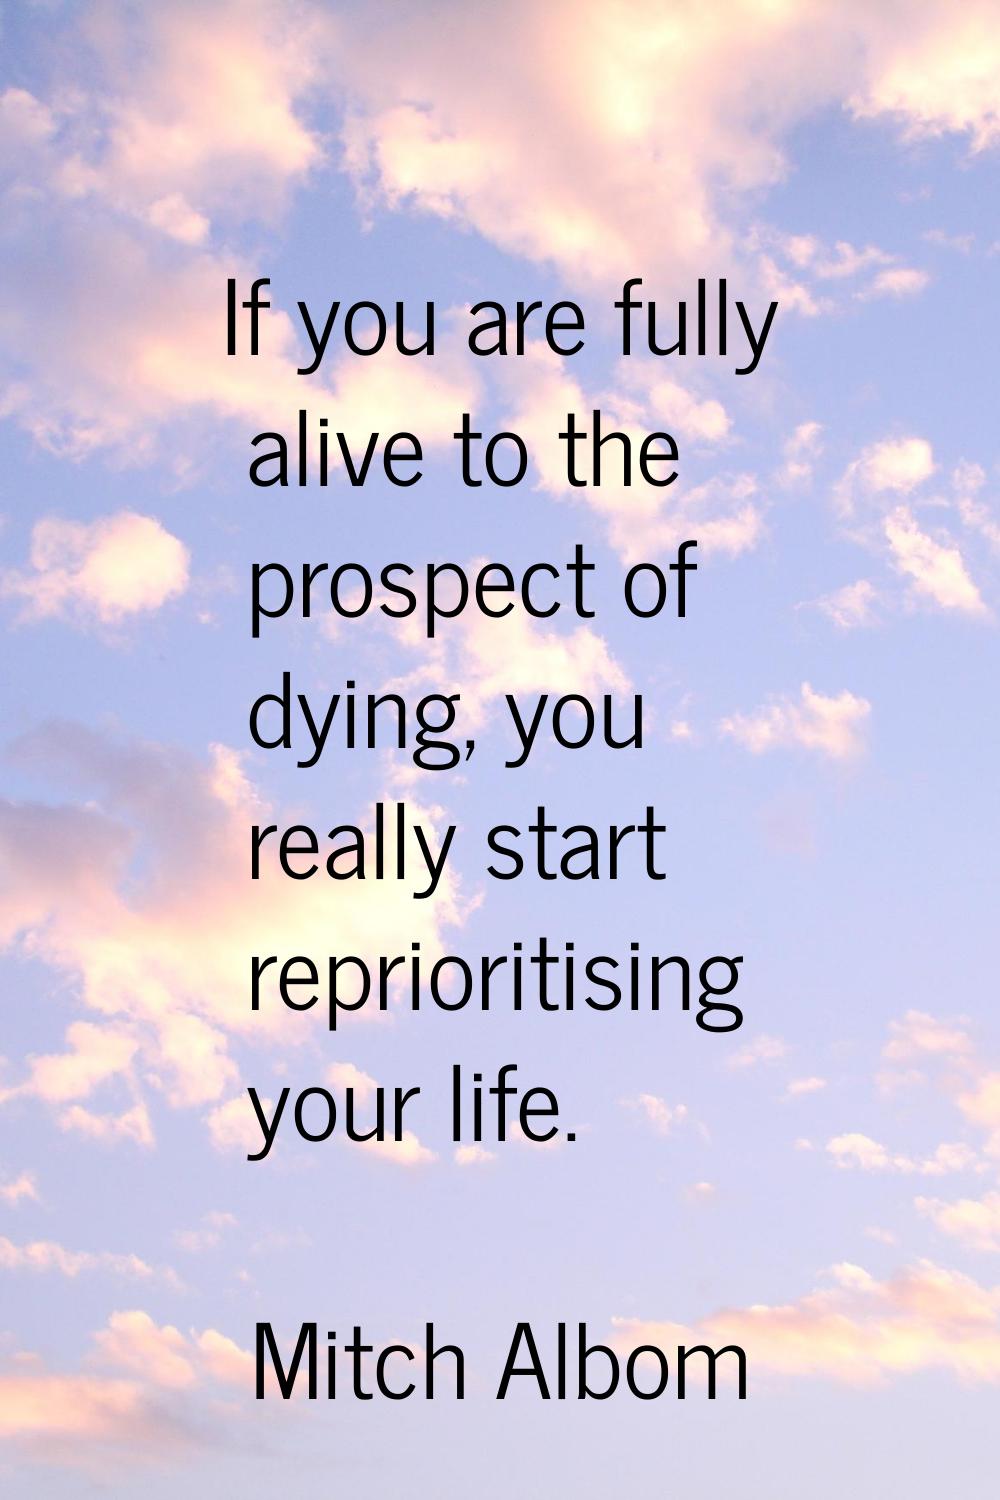 If you are fully alive to the prospect of dying, you really start reprioritising your life.